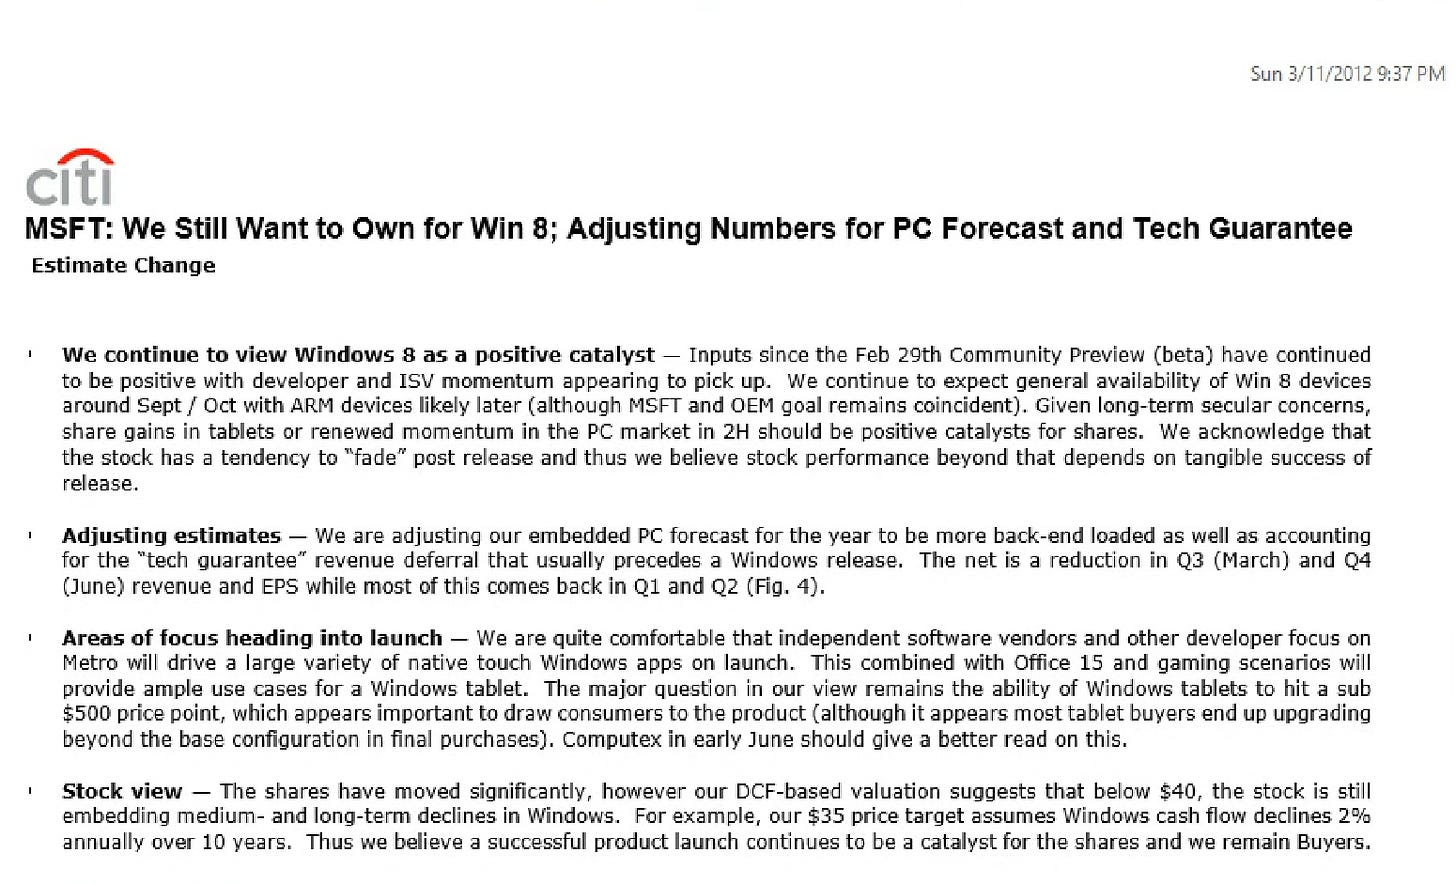 MSFT: We Still Want to Own for Win 8; Adjusting Numbers for PC Forecast and Tech Guarantee Estimate Change I We continue to view windows 8 as a positive catalyst - Inputs since the Feb 29th Community Preview (beta) have continued to be positive with developer and IS momentum appearing to pick up. We continue to expect general availability of win 8 devices around Sept / Oct with ARM devices likely later (although MST and OEM goal remains coincident). Given long-term secular concerns, share gains in tablets or renewed momentum in the PC market in 2H should be positive catalysts for shares. We acknowledge that the stock has a tendency to "fade" post release and thus we believe stock performance beyond that depends on tangible success of release. Adiusting estimates - We are adiusting our embedded PC forecast for the vear to be more back-end loaded as well as accounting for the "tech guarantee" revenue deferral that usually precedes a Windows release. The net is a reduction in 03 (March) and 04 (June) revenue and EPS while most of this comes back in 01 and Q2 (Fig. 4). Areas of focus heading into launch - We are quite comfortable that independent software vendors and other developer focus on Metro will drive a large variety of native touch Windows apps on launch. This combined with Office 15 and gaming scenarios will provide ample use cases for a Windows tablet. The major question in our view remains the ability of Windows tablets to hit a sub $500 price point, which appears important to draw consumers to the product (although it appears most tablet buyers end up upgrading beyond the base configuration in final purchases). Computex in early June should give a better read on this. Stock view - The shares have moved significantly, however our DCF-based valuation suggests that below $40, the stock is still embedding medium- and long-term declines in Windows. For example, our $35 price target assumes Windows cash flow declines 2% annually over 10 years. Thus we believe a successful product launch continues to be a catalyst for the shares and we remain Buyers.